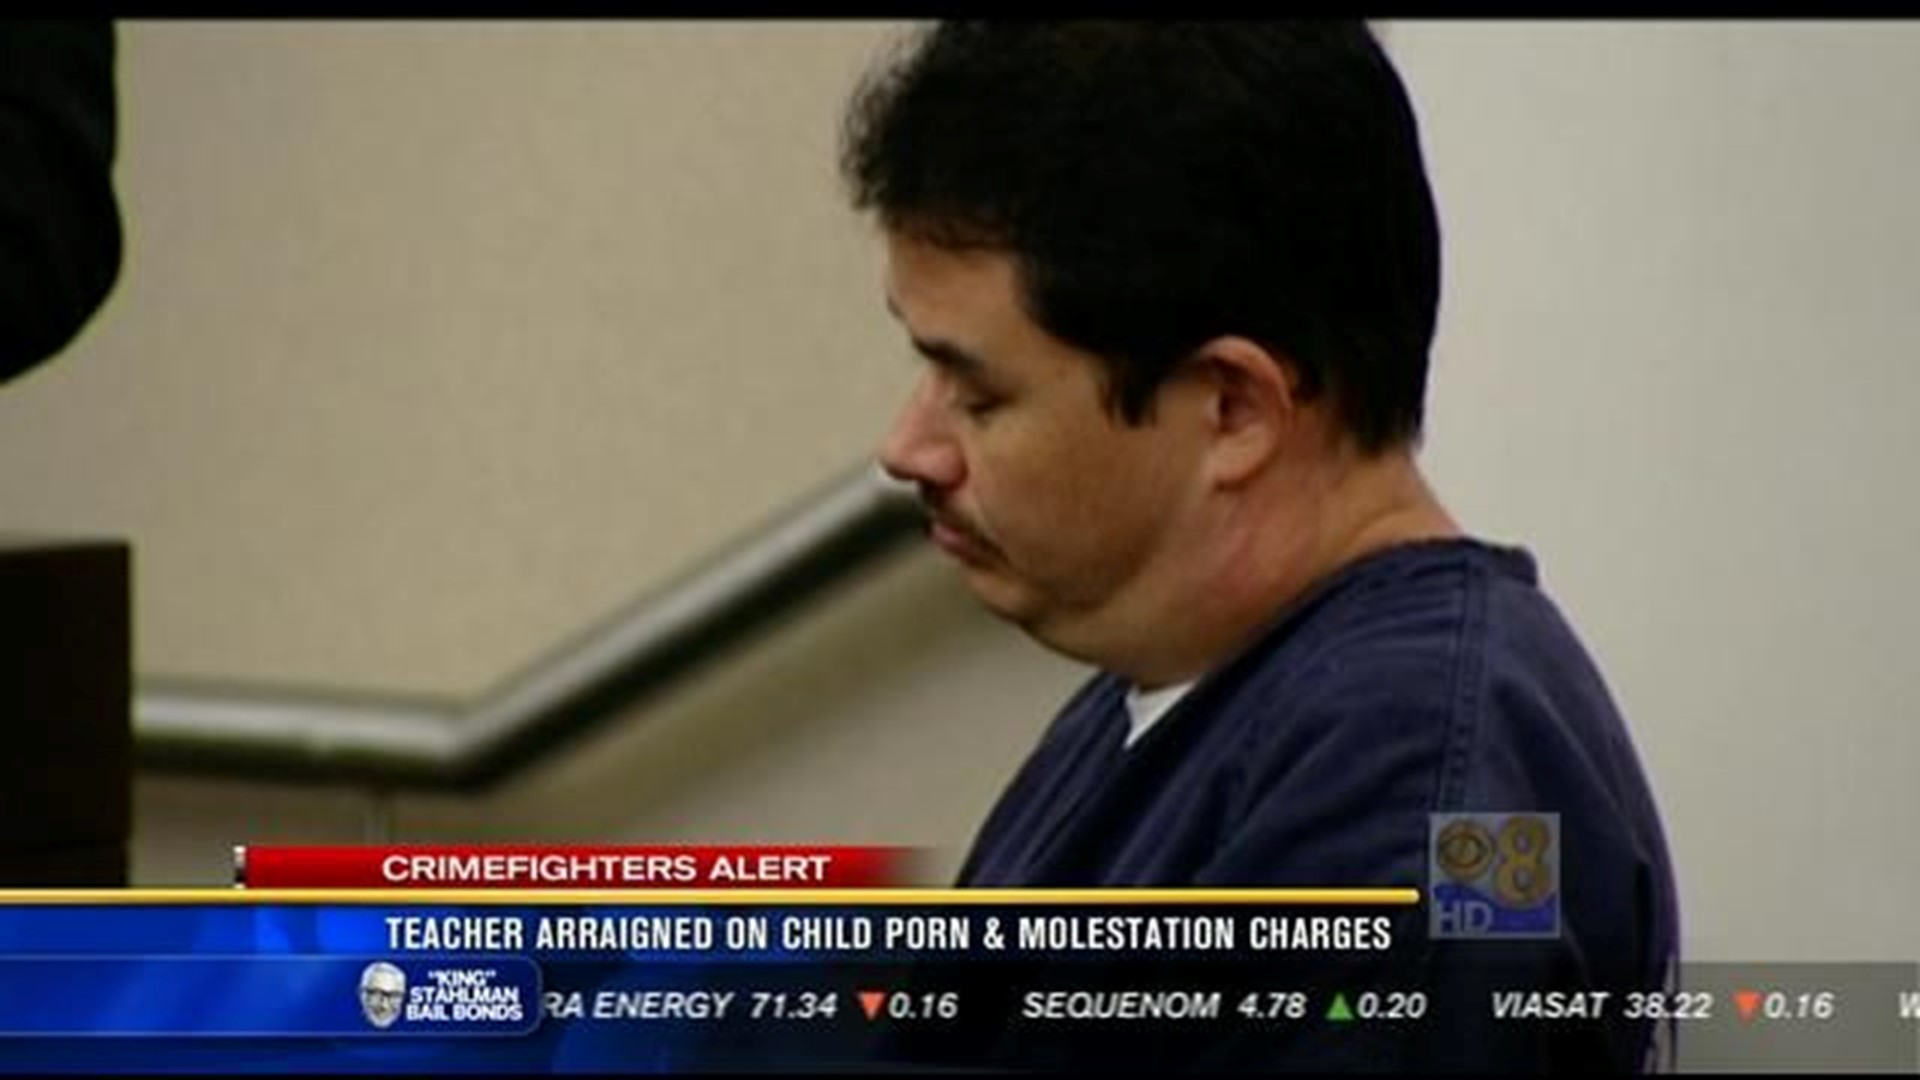 Teacher And Student - Not guilty plea from South Bay teacher accused of molesting student,  possessing child porn | cbs8.com